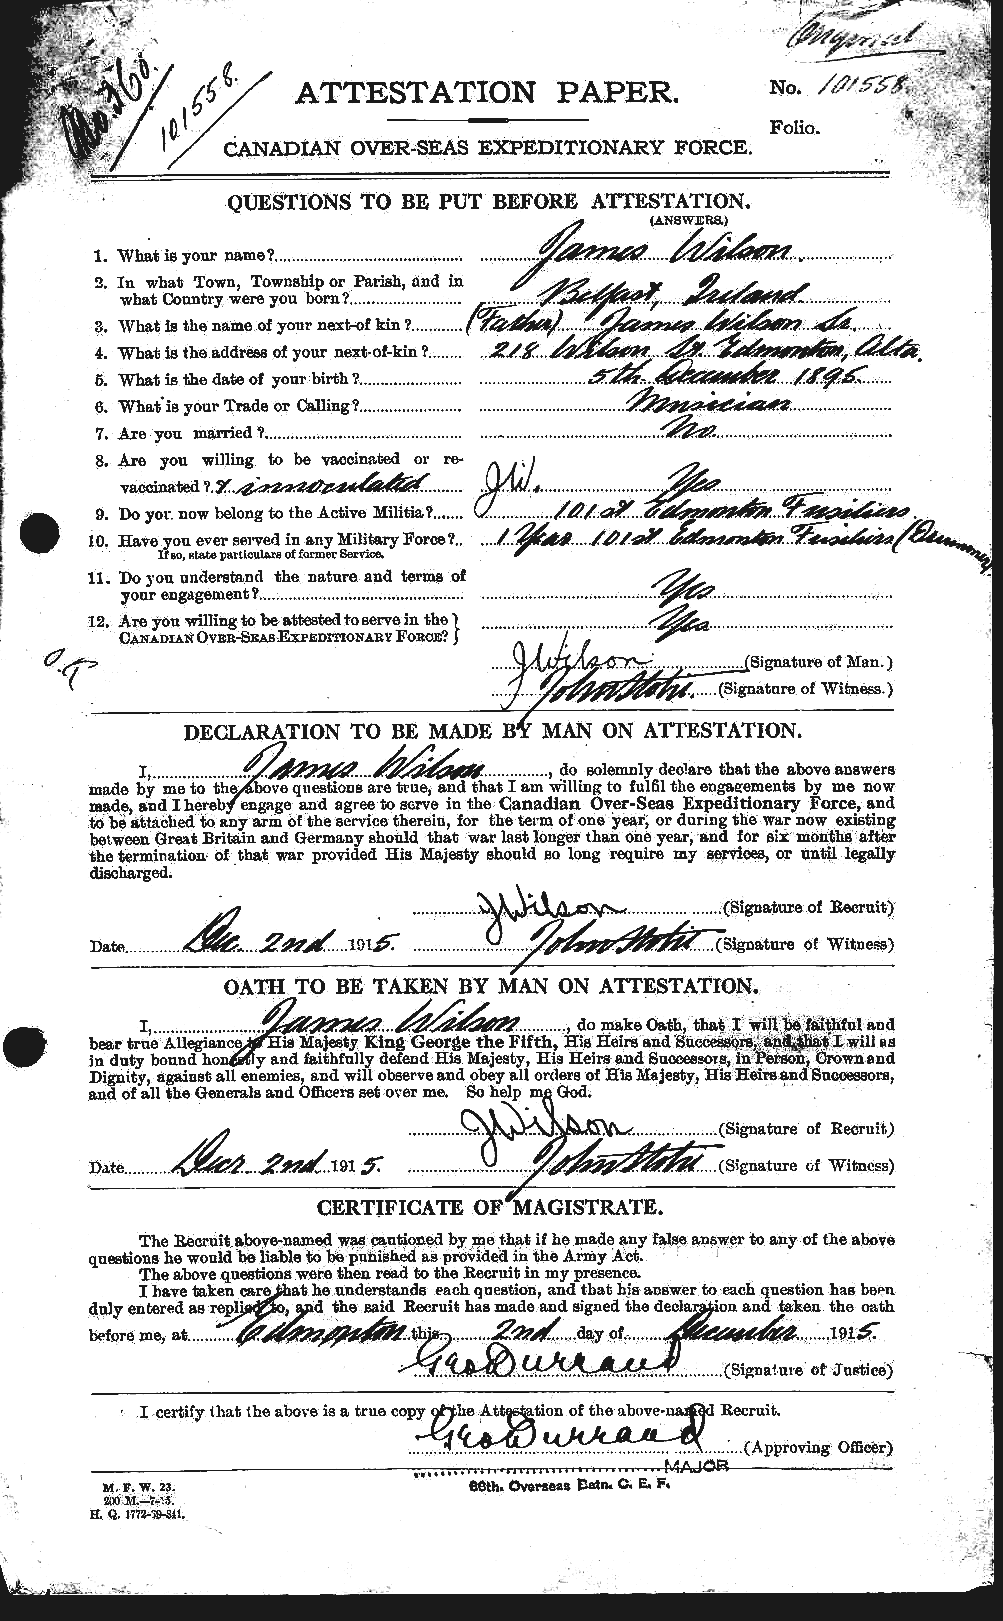 Personnel Records of the First World War - CEF 681316a